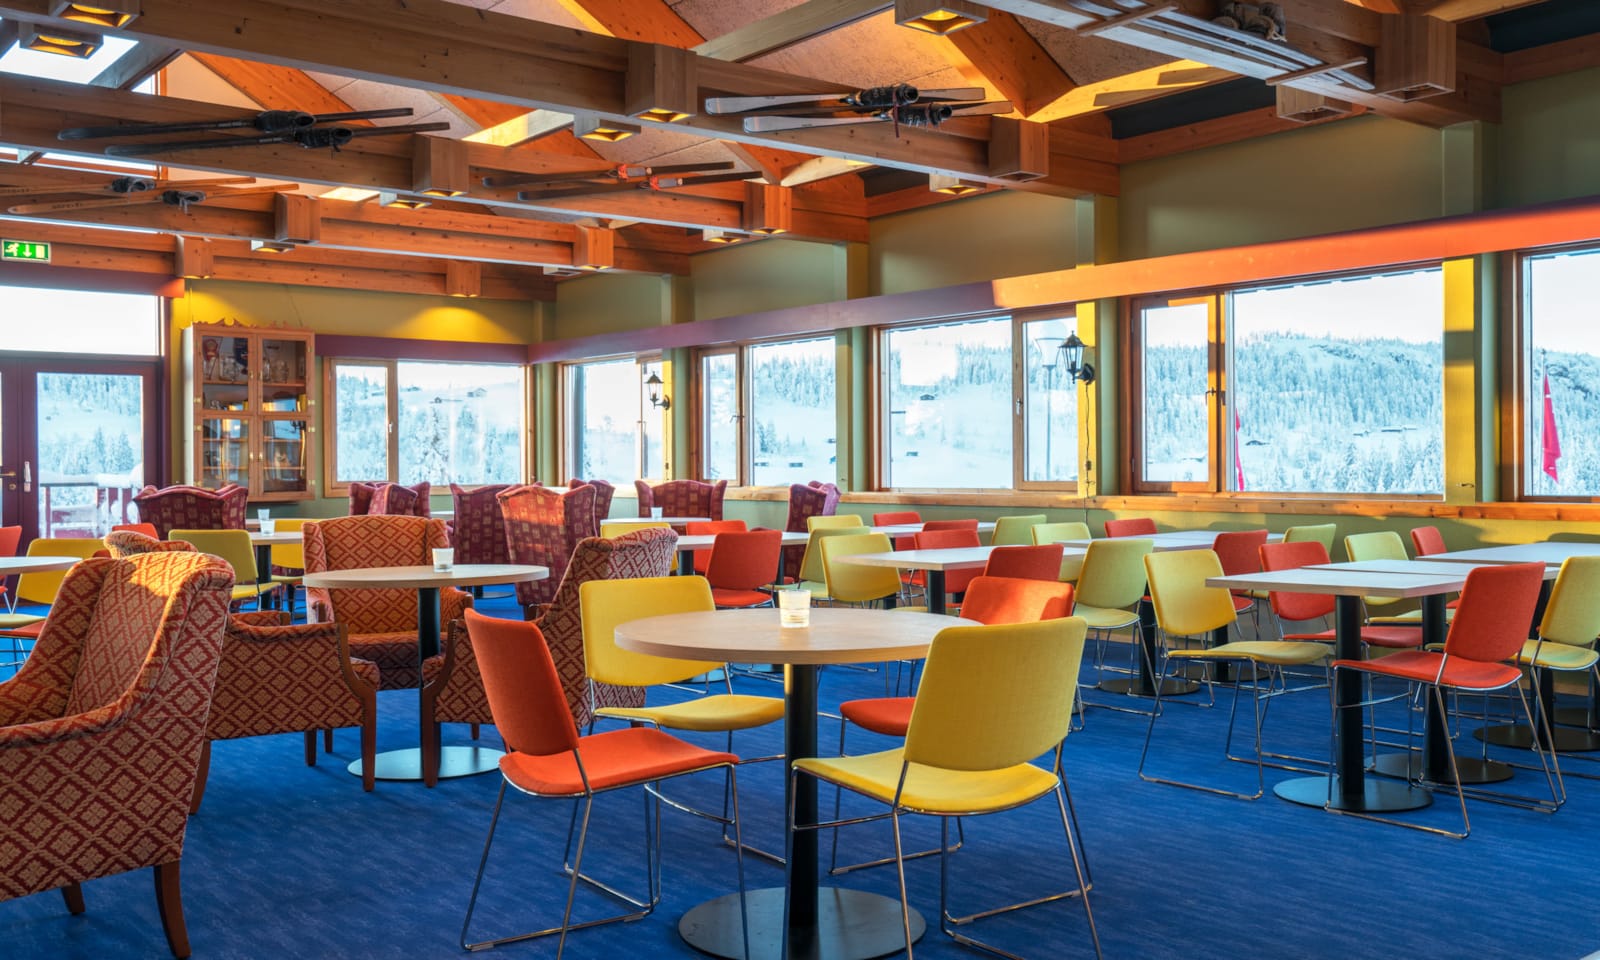 Dining area with colourful chairs, large painting of Skeikampen on the wall and large windows that look out onto the landscape of the Austlid fjellstue